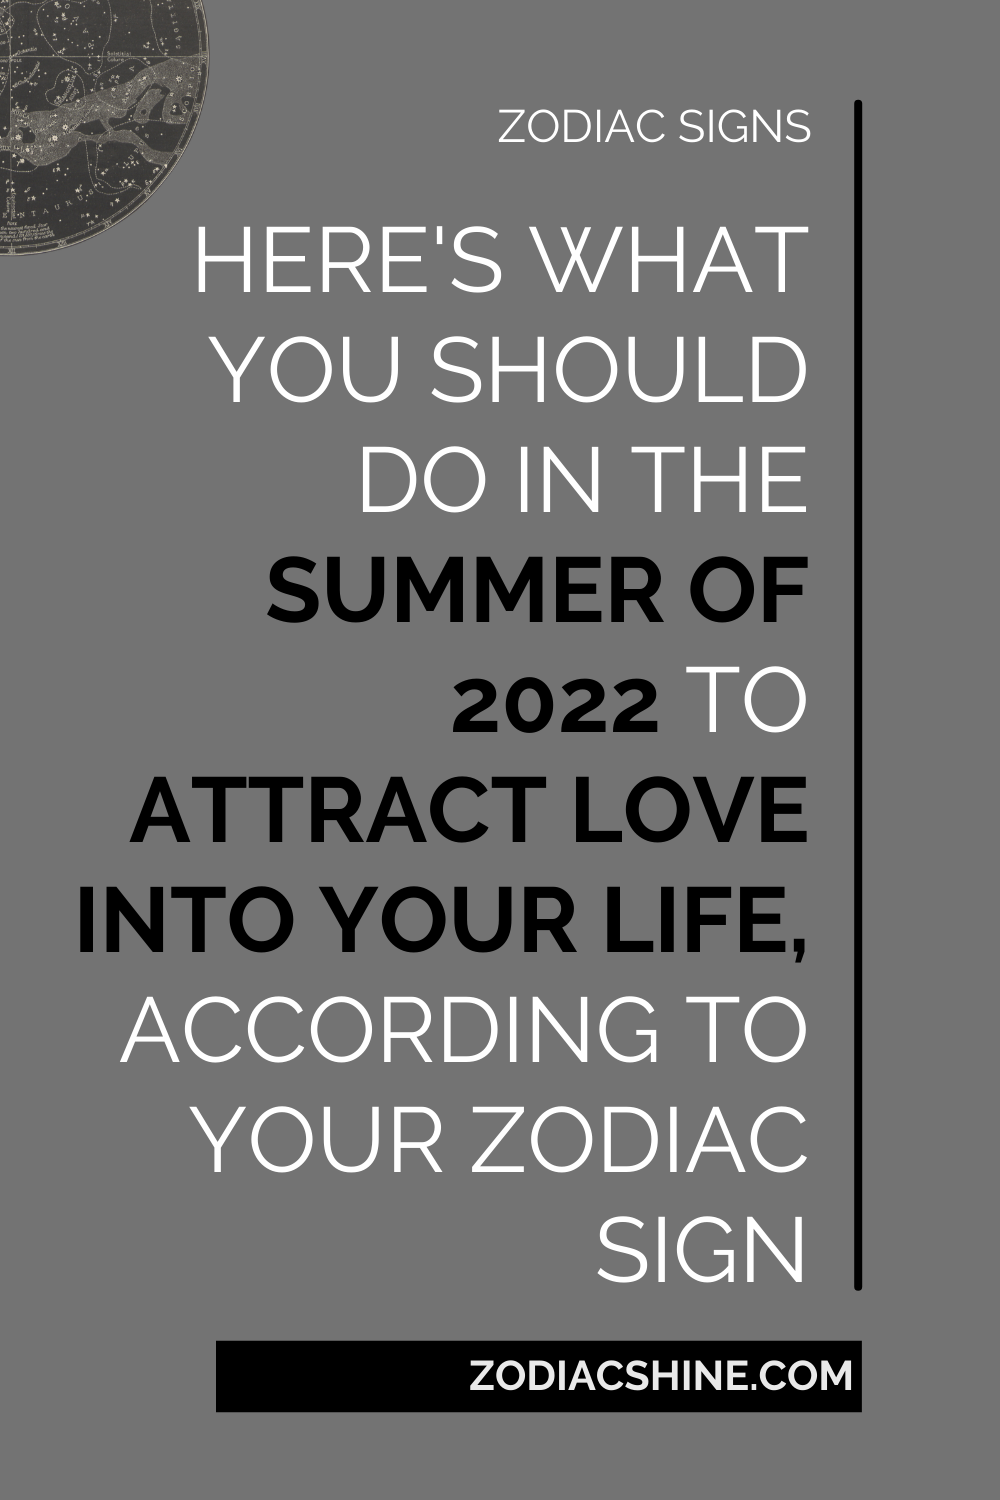 Here's What You Should Do In The Summer Of 2022 To Attract Love Into Your Life According To Your Zodiac Sign